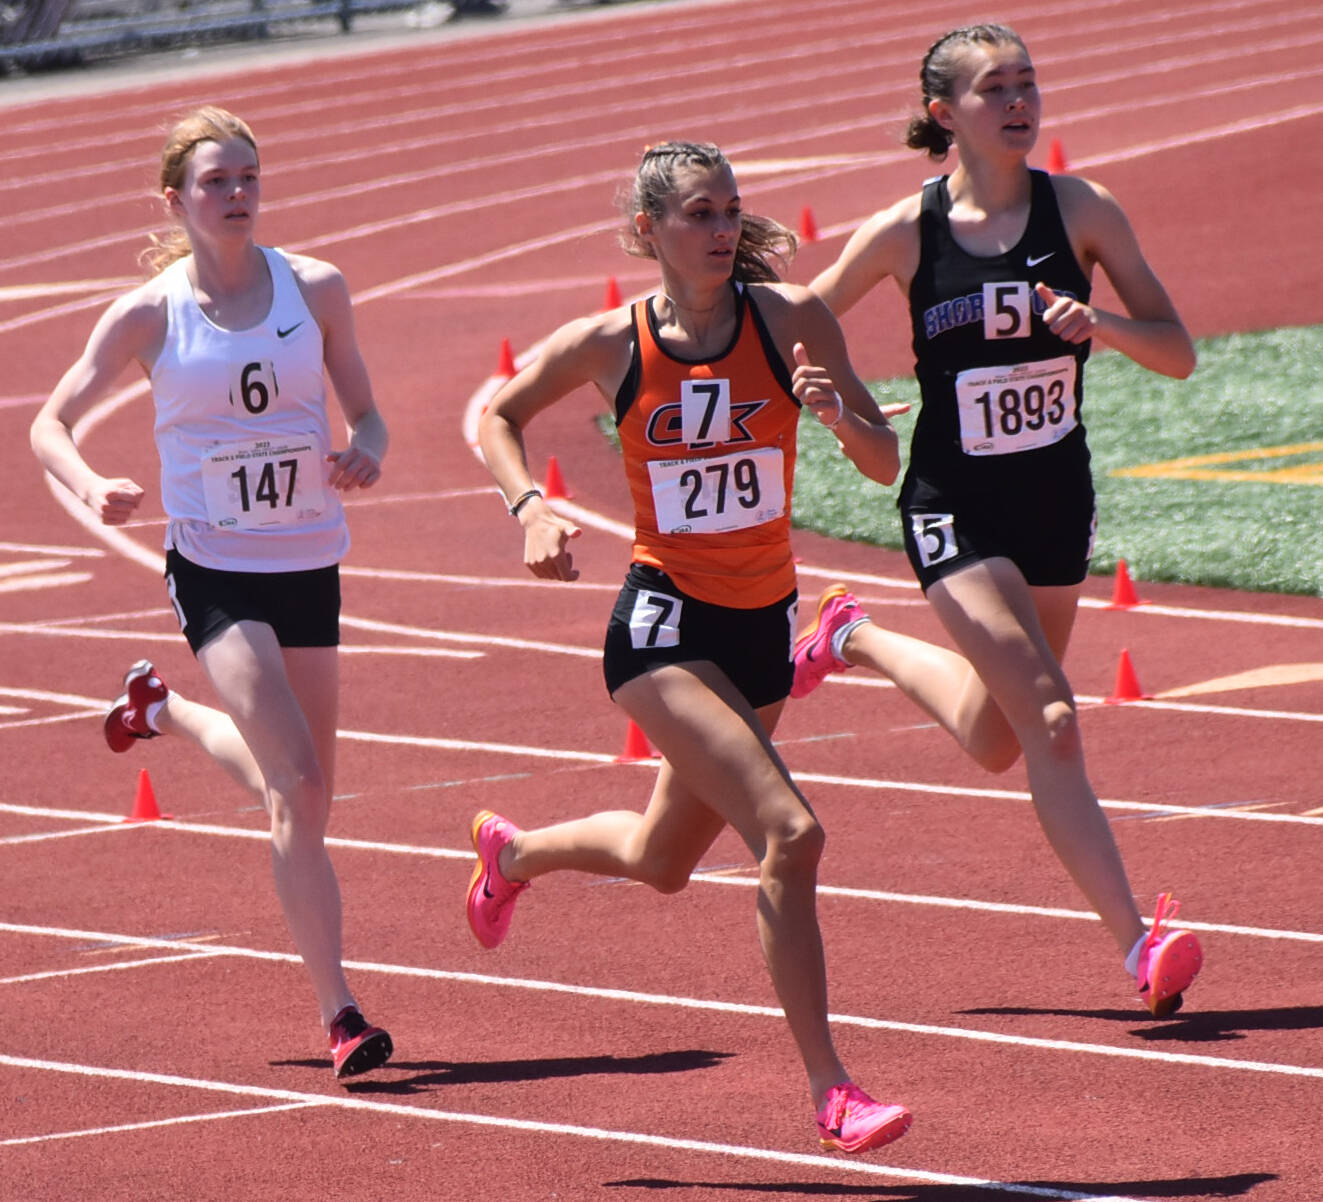 Central Kitsap’s Audra Palmer finished fifth in the 1600 event at state. Nicholas Zeller-Singh/Kitsap News Group Photos